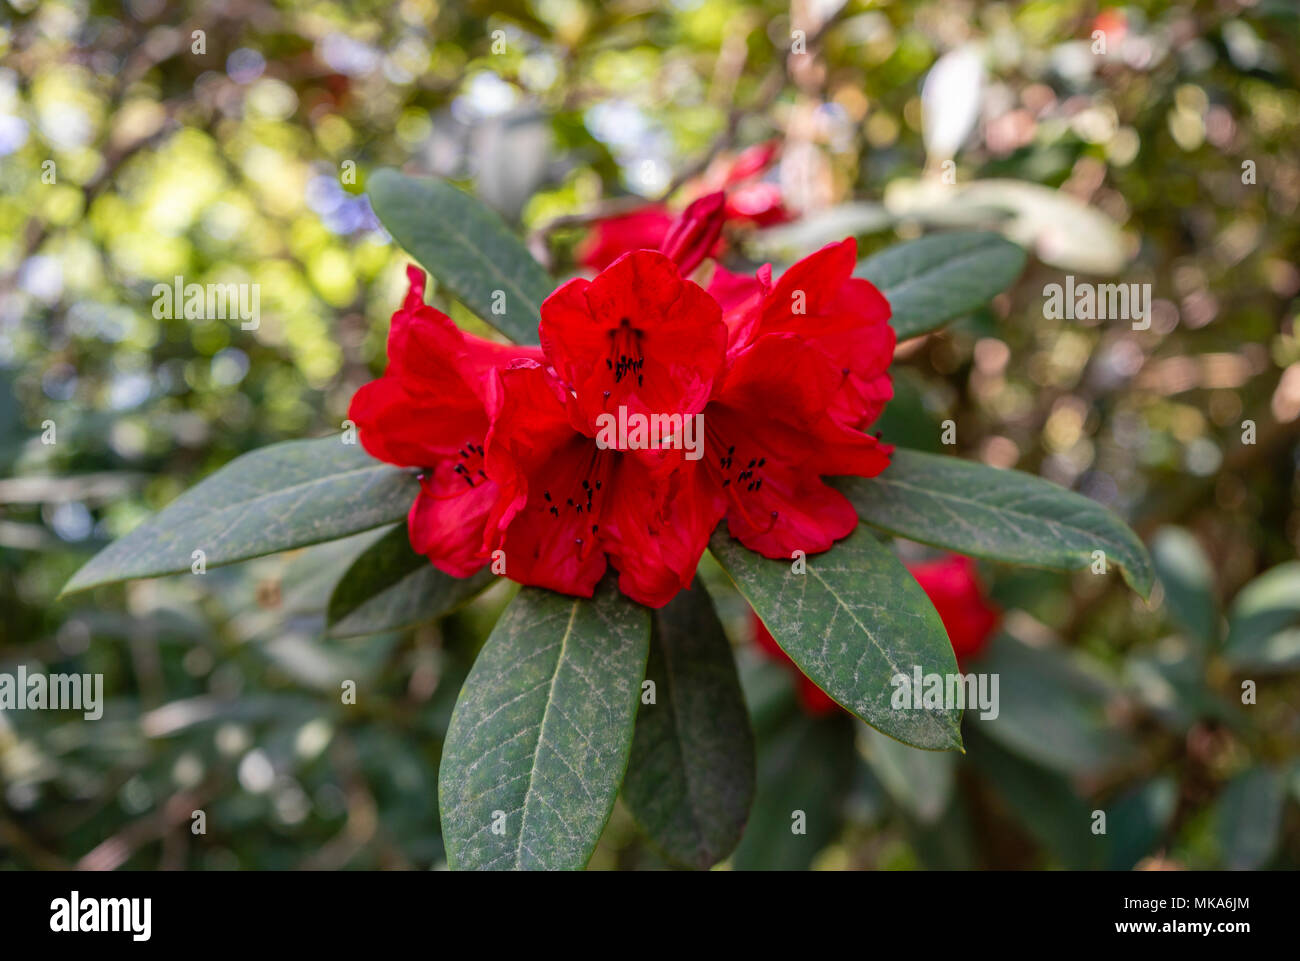 Red flower trusses of a Red Rhododendron Taurus plant variety in a garden in Southern England during Spring (May), UK Stock Photo